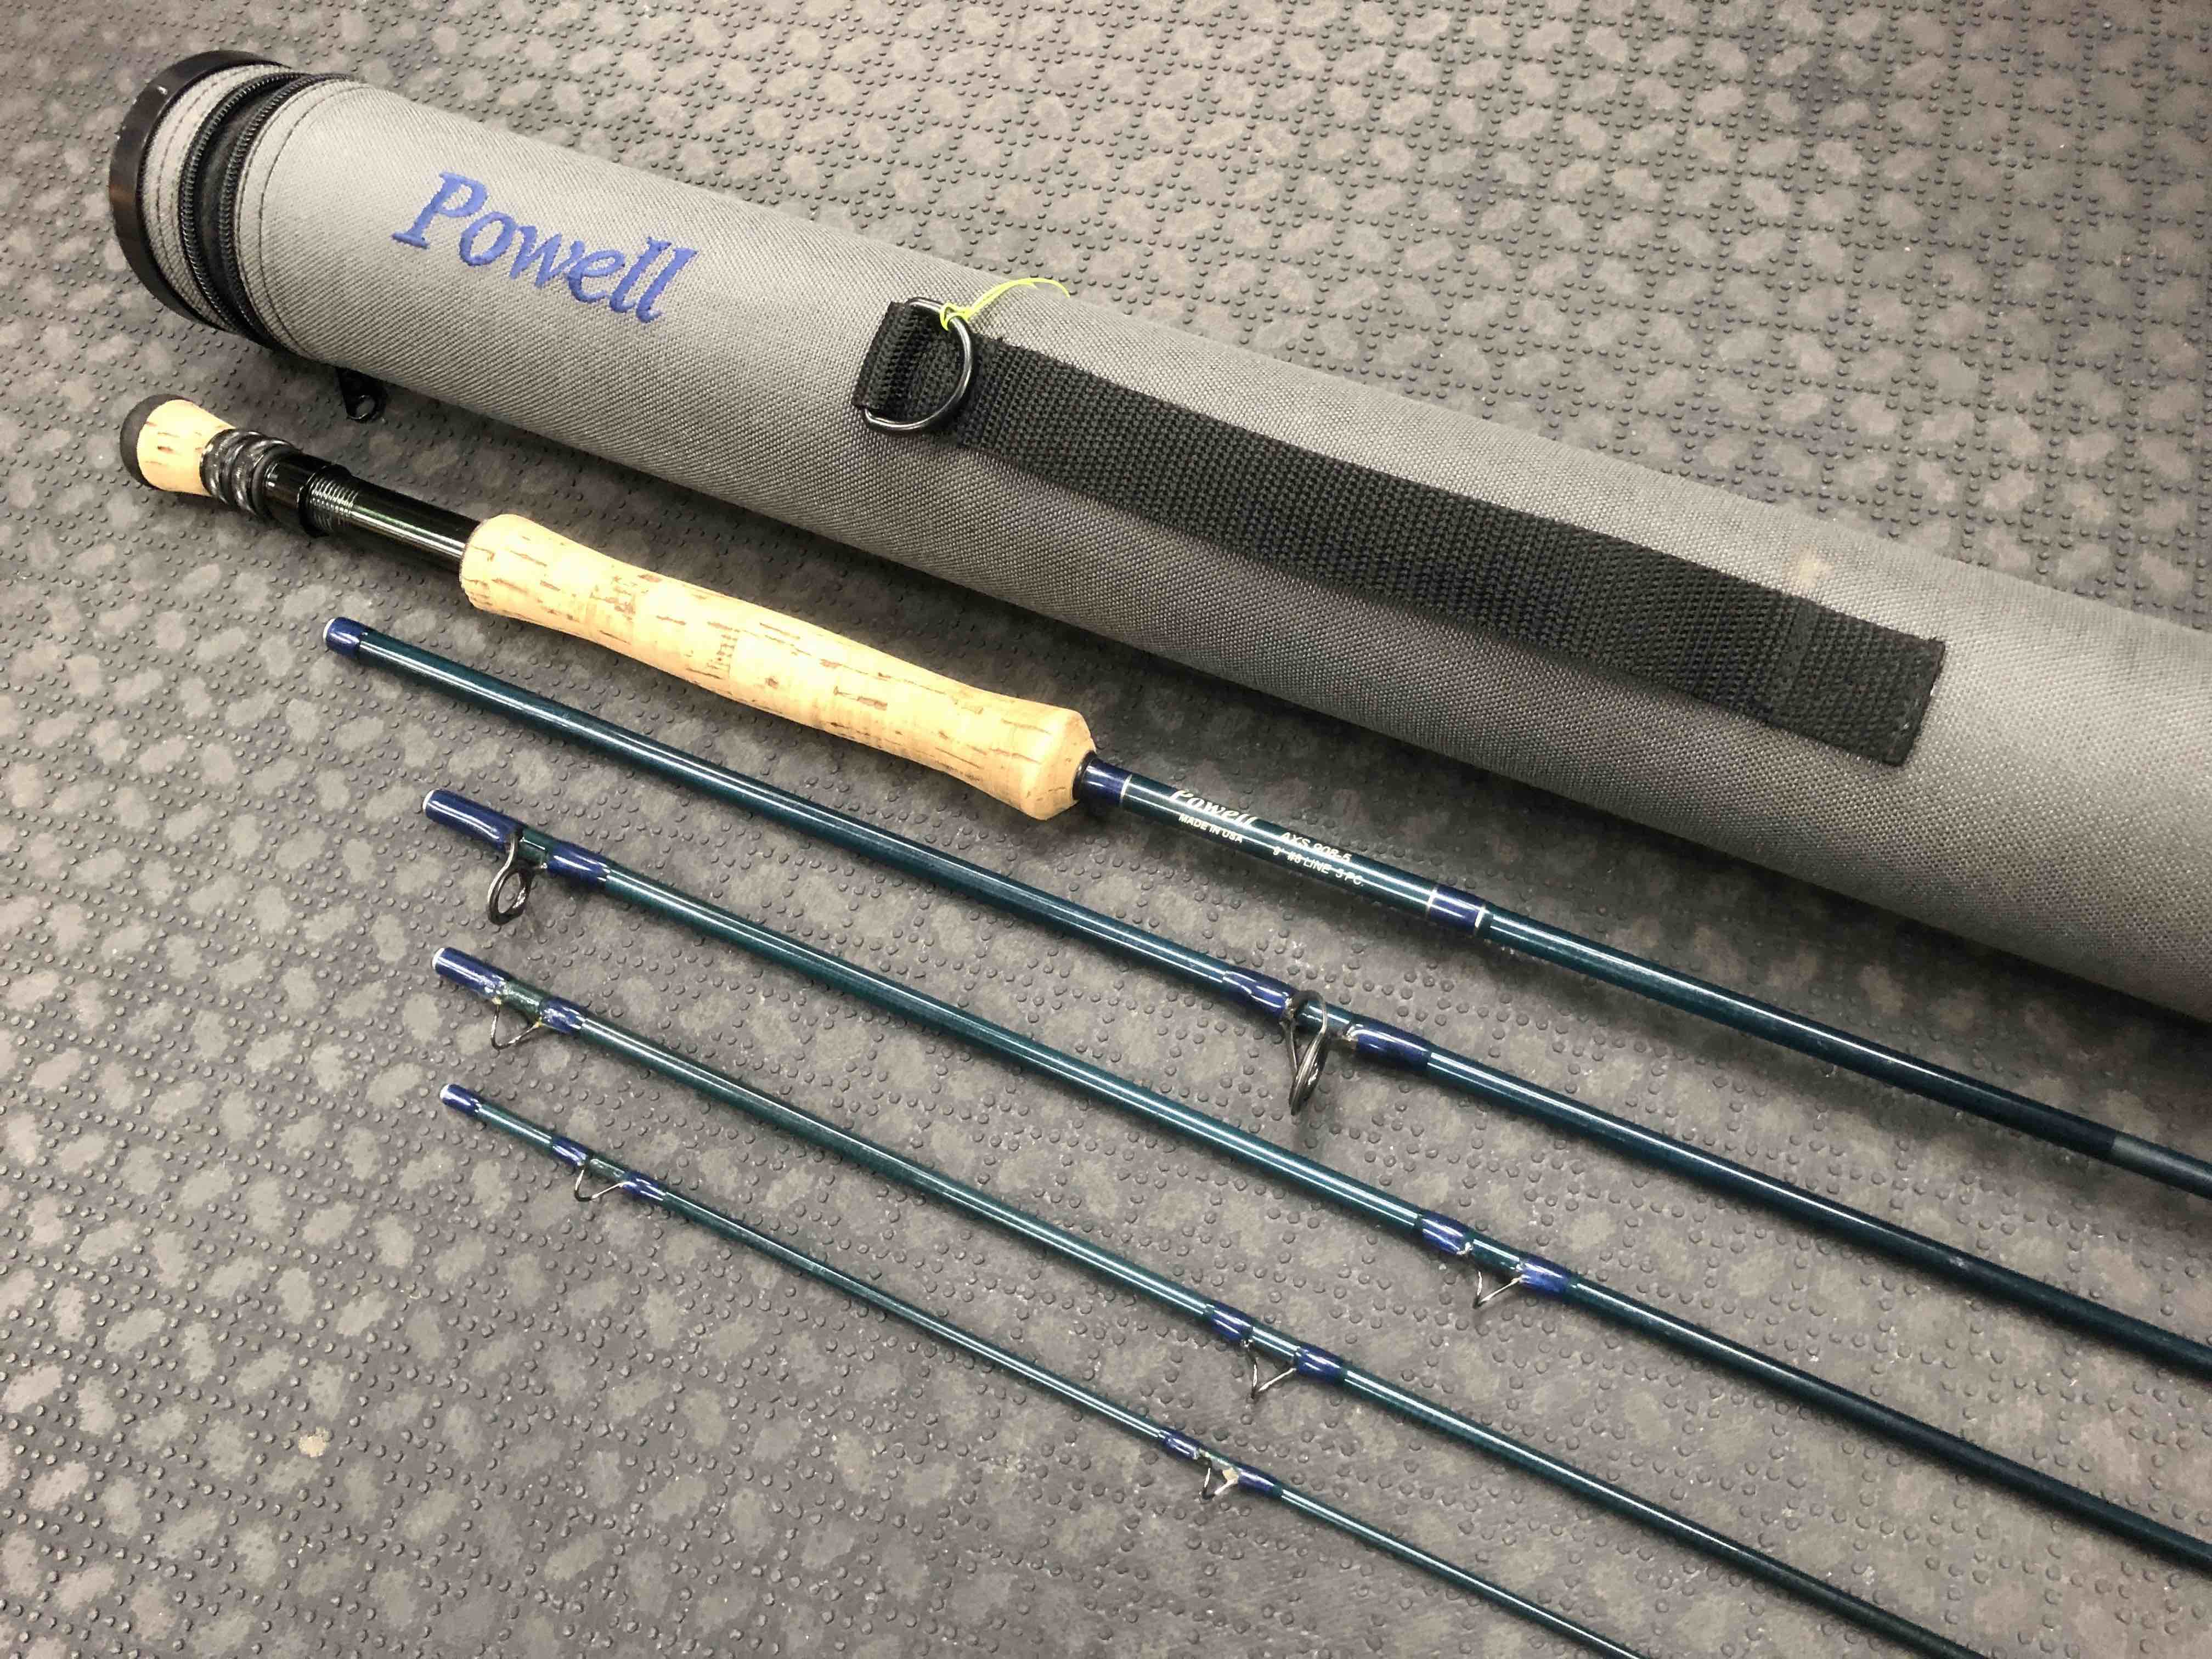 https://thefirstcast.ca/wp-content/uploads/2019/11/Powell-Made-in-The-USA-AXS908-5-9foot-8-weight-5-piece-Fly-Rod-CC.jpg